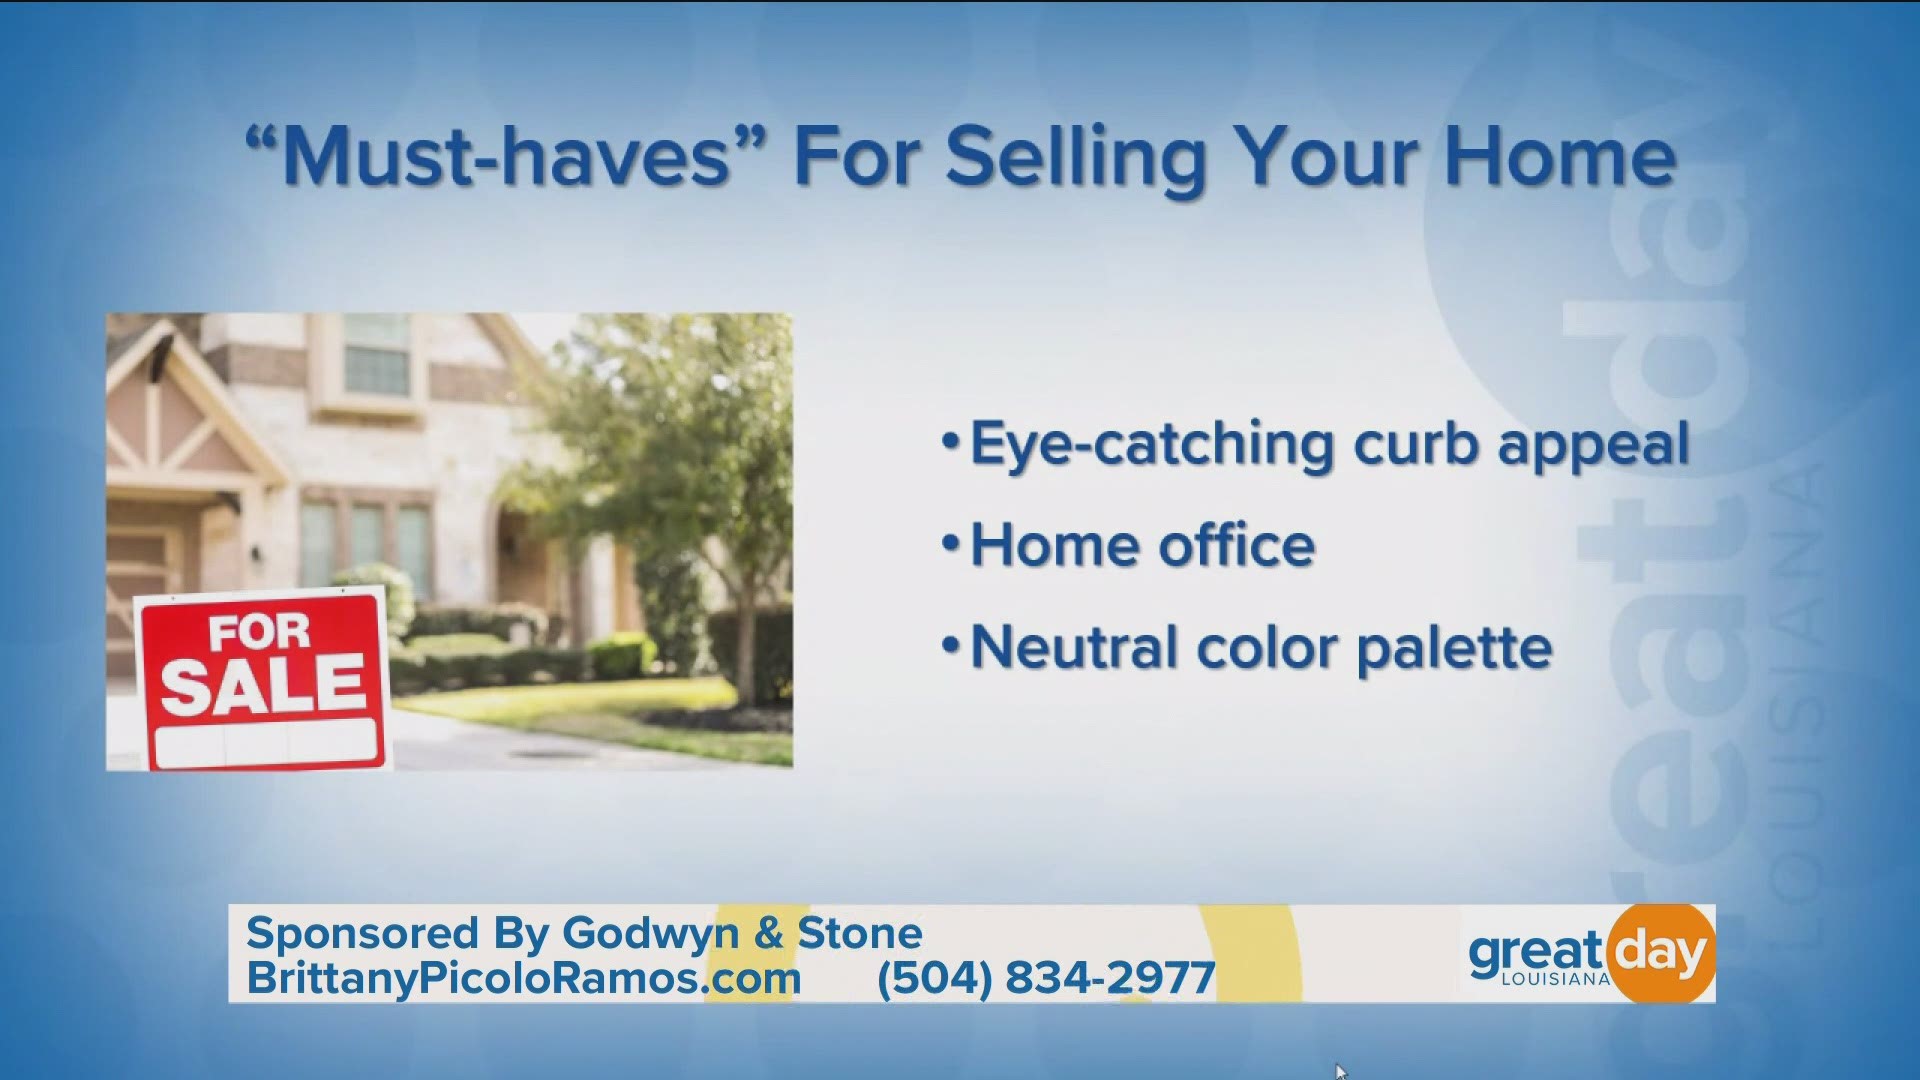 Brittany Picolo-Ramos, the star of HGTV’s Selling the Big Easy and Co-Owner of Godwyn & Stone Real Estate, gives tips on preparing to sell your home.